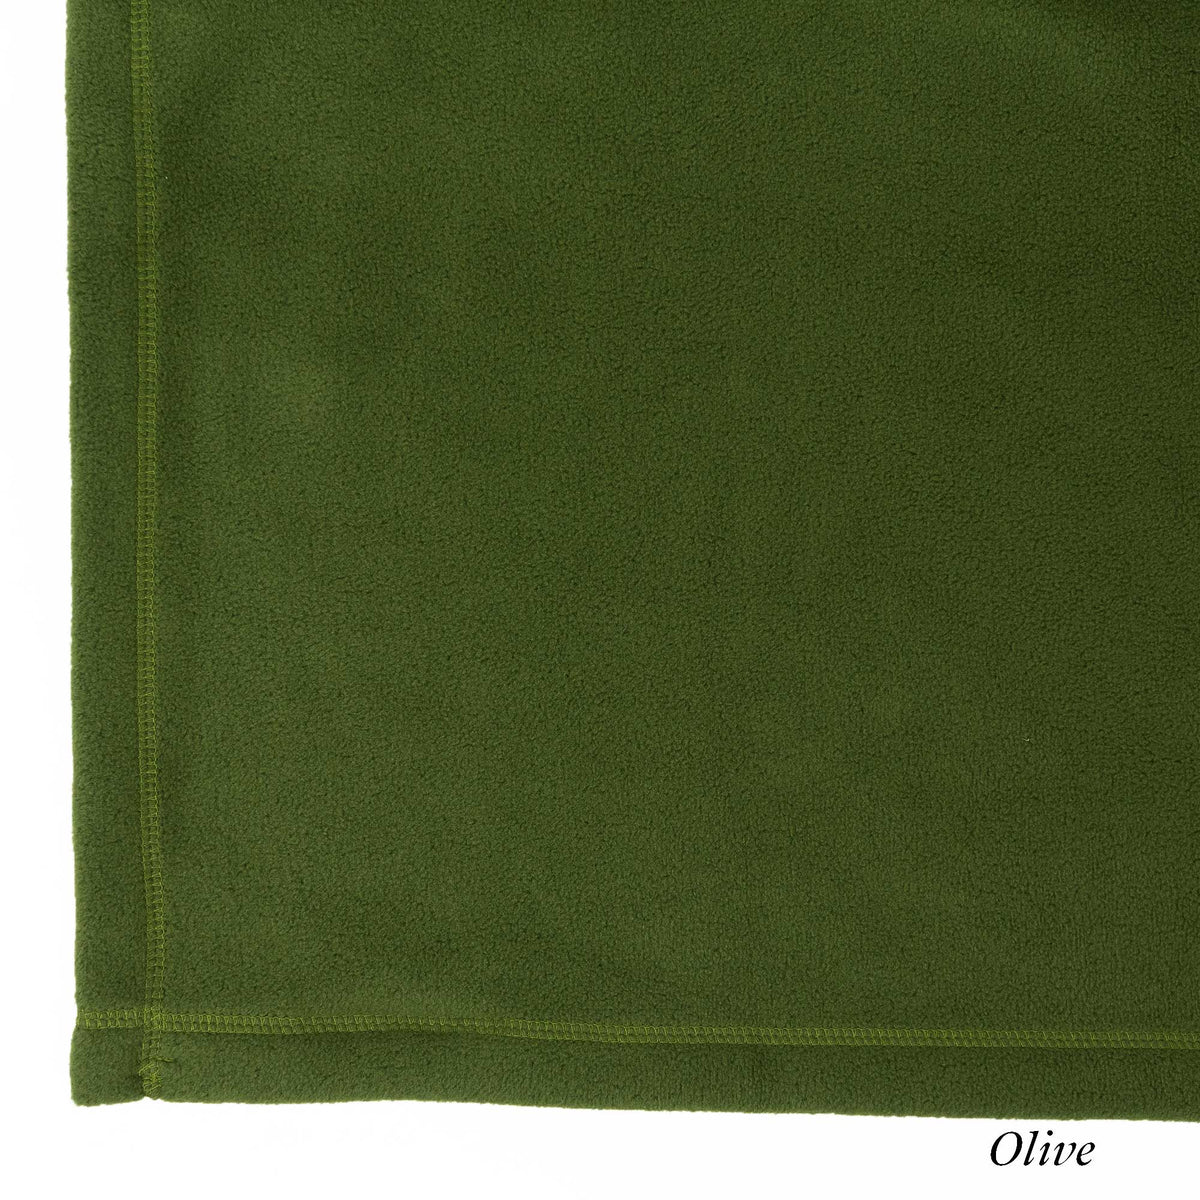 Olive Swatch - Fleece Pillowcase - Peaceful Touch - American Blanket Company